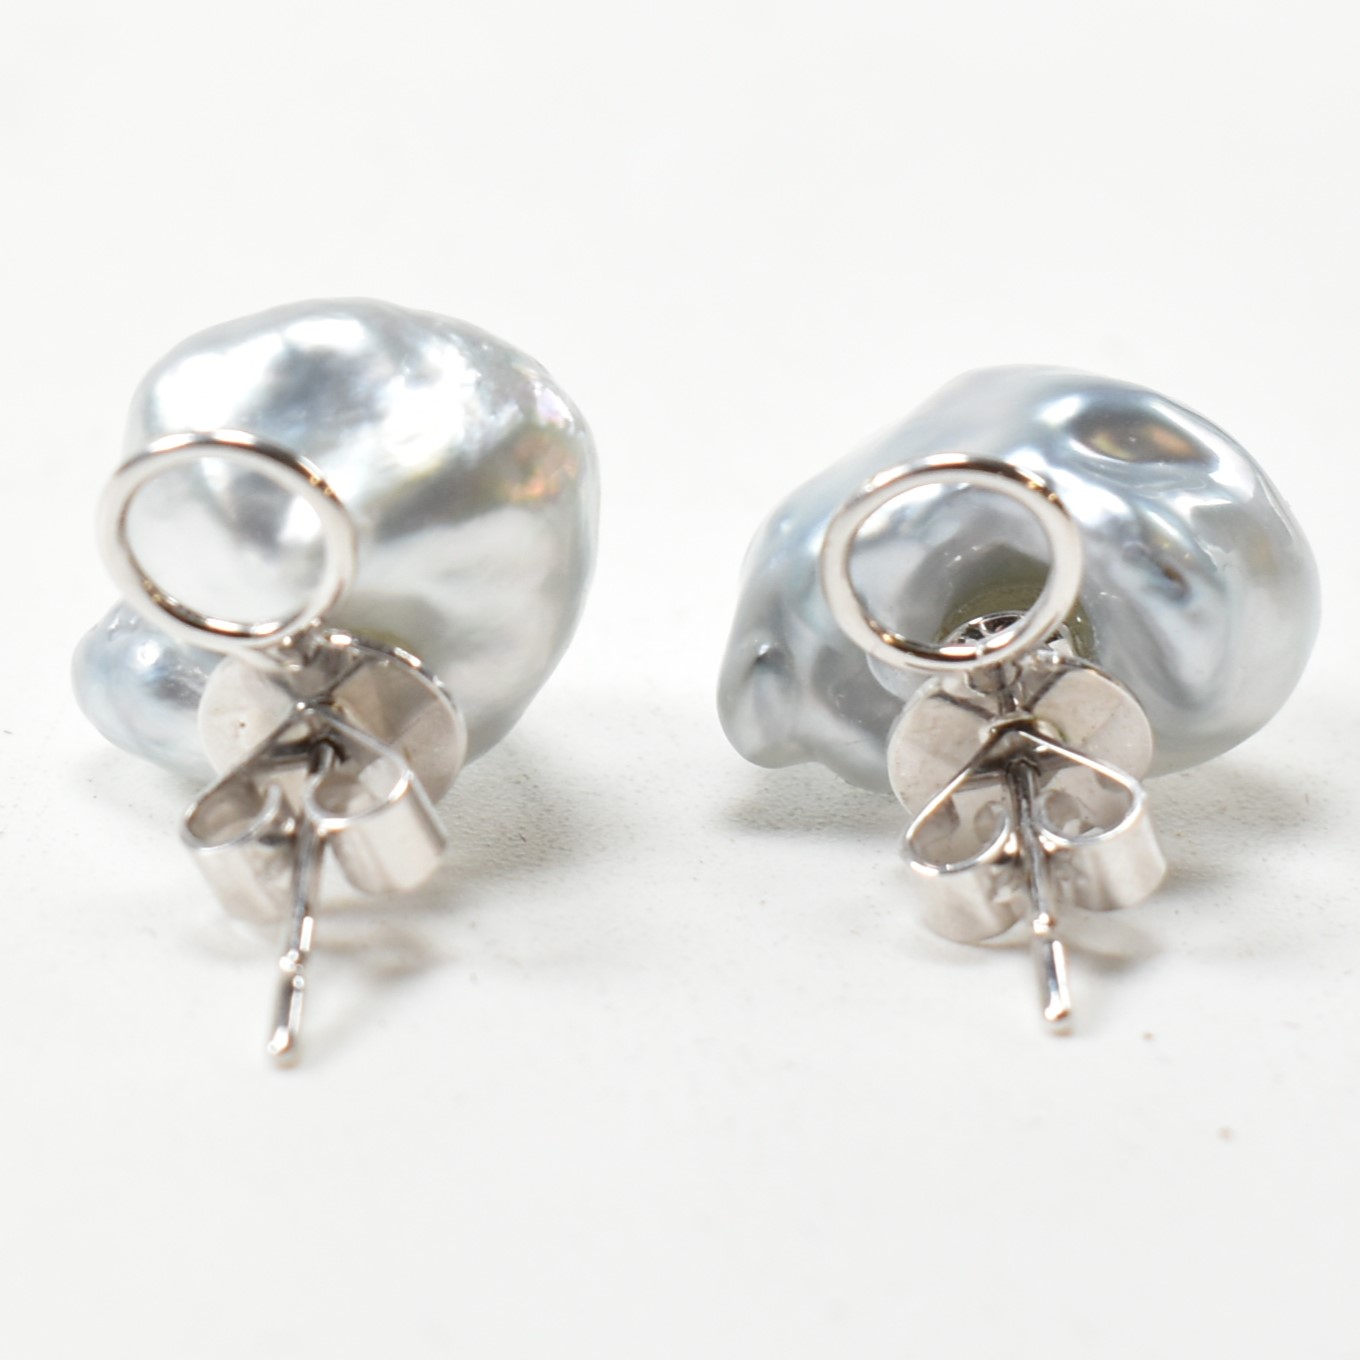 PAIR OF BAROQUE PEARL & 18CT WHITE GOLD STUD EARRINGS - Image 2 of 3